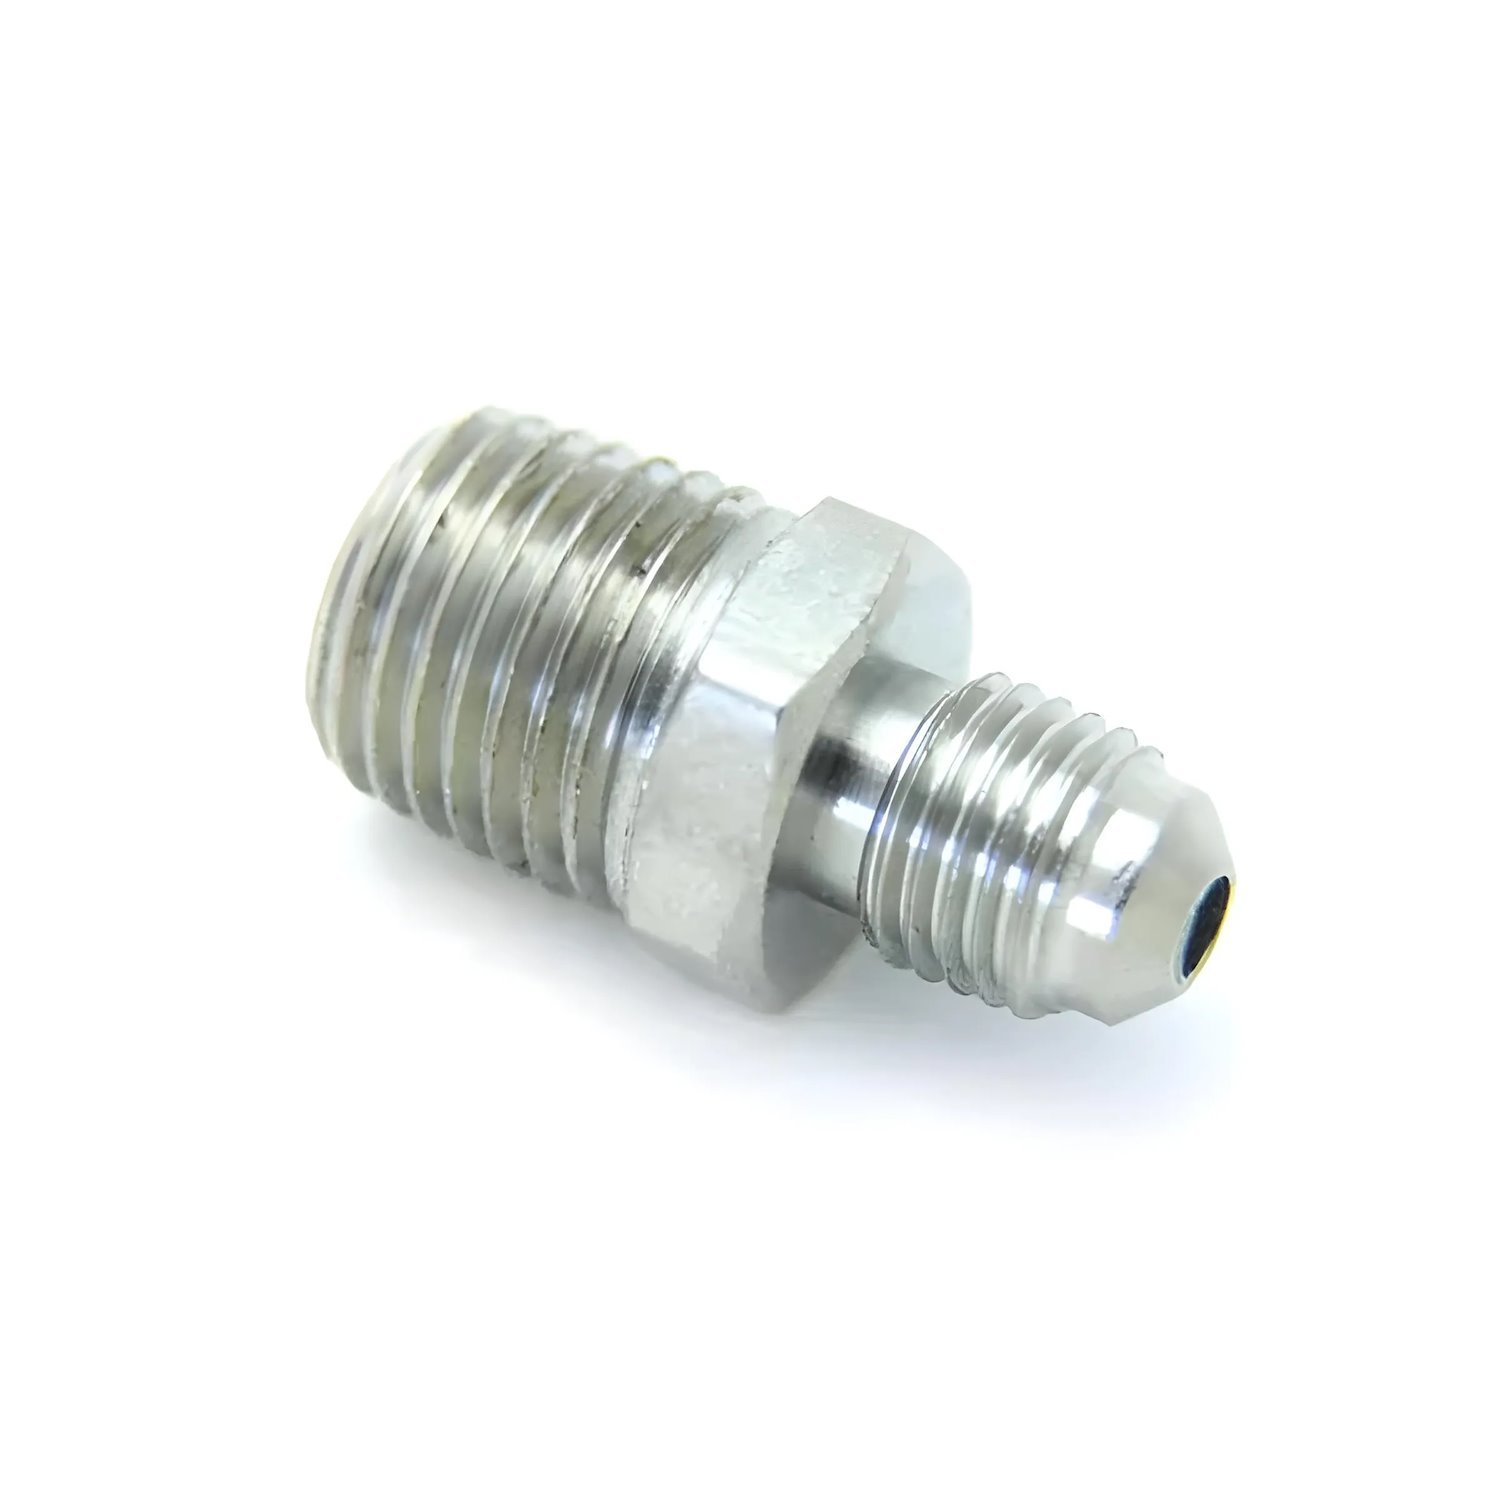 00-01154-B 1/4 in. NPT x 3AN Straight Fitting, Male/Male